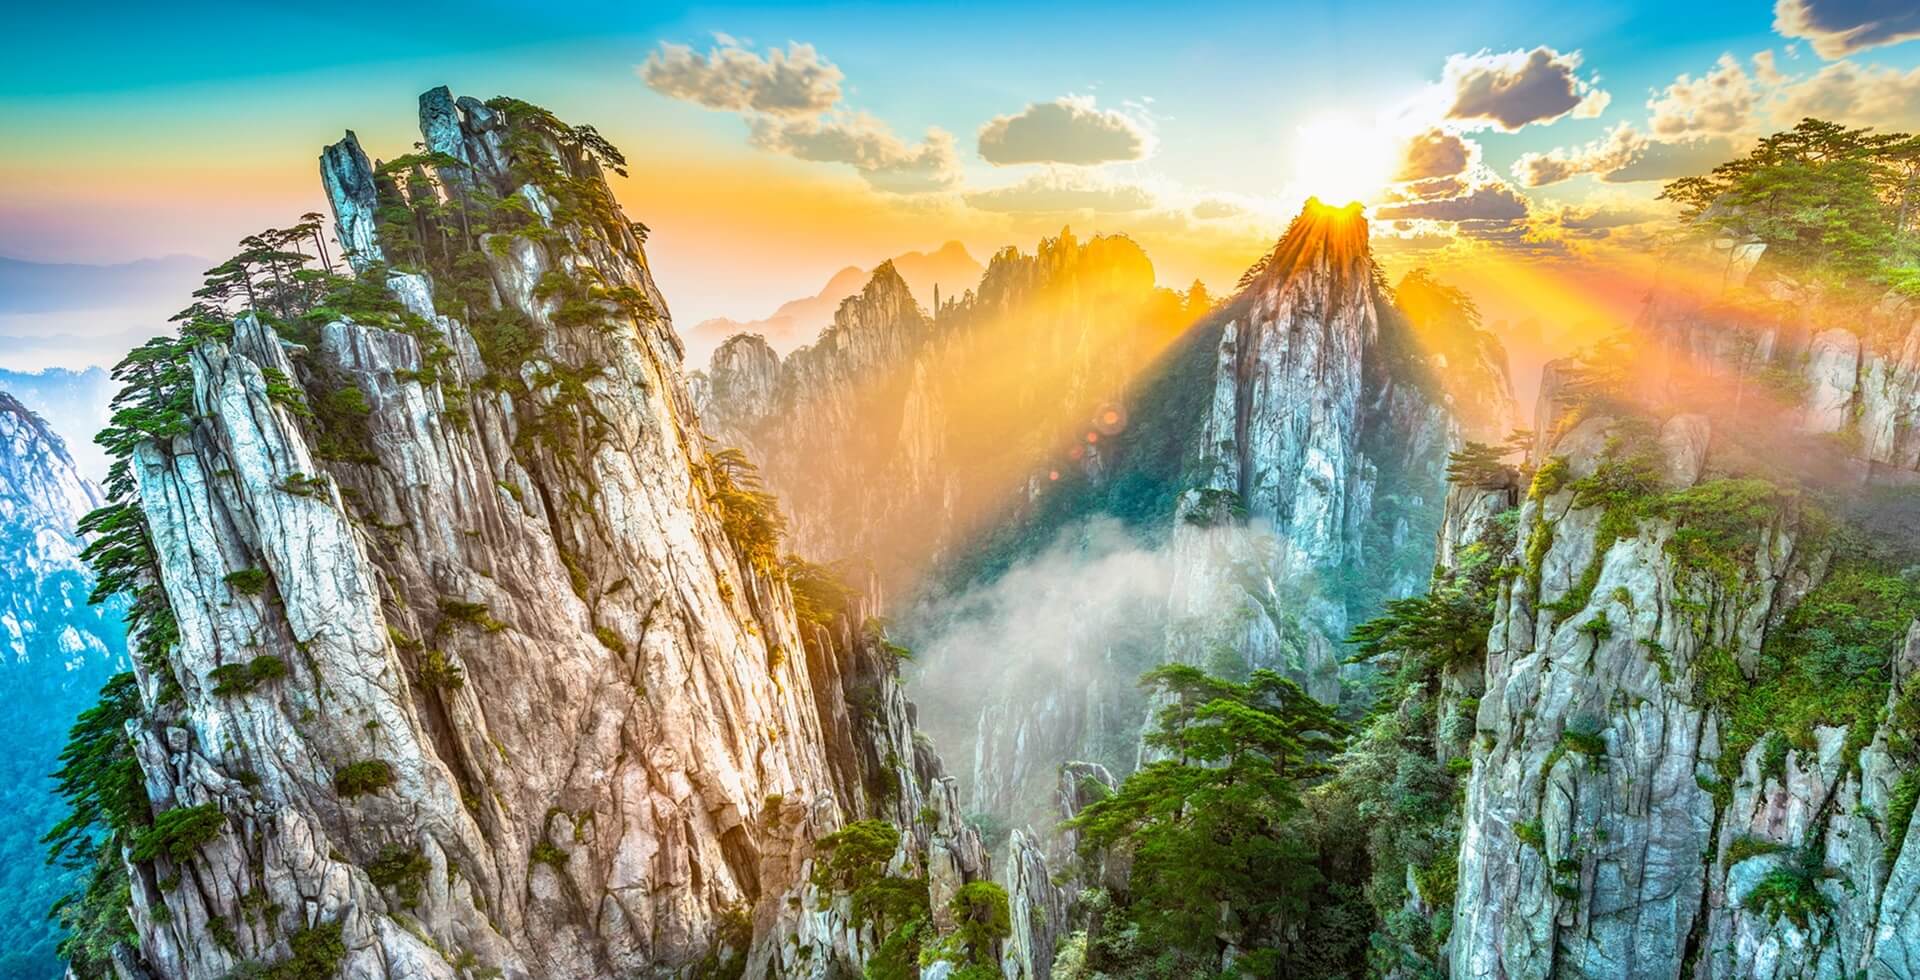 Footer Landscape of Mount Huangshan (Yellow Mountains). UNESCO World Heritage Site. Located in Huangshan, Anhui, China.